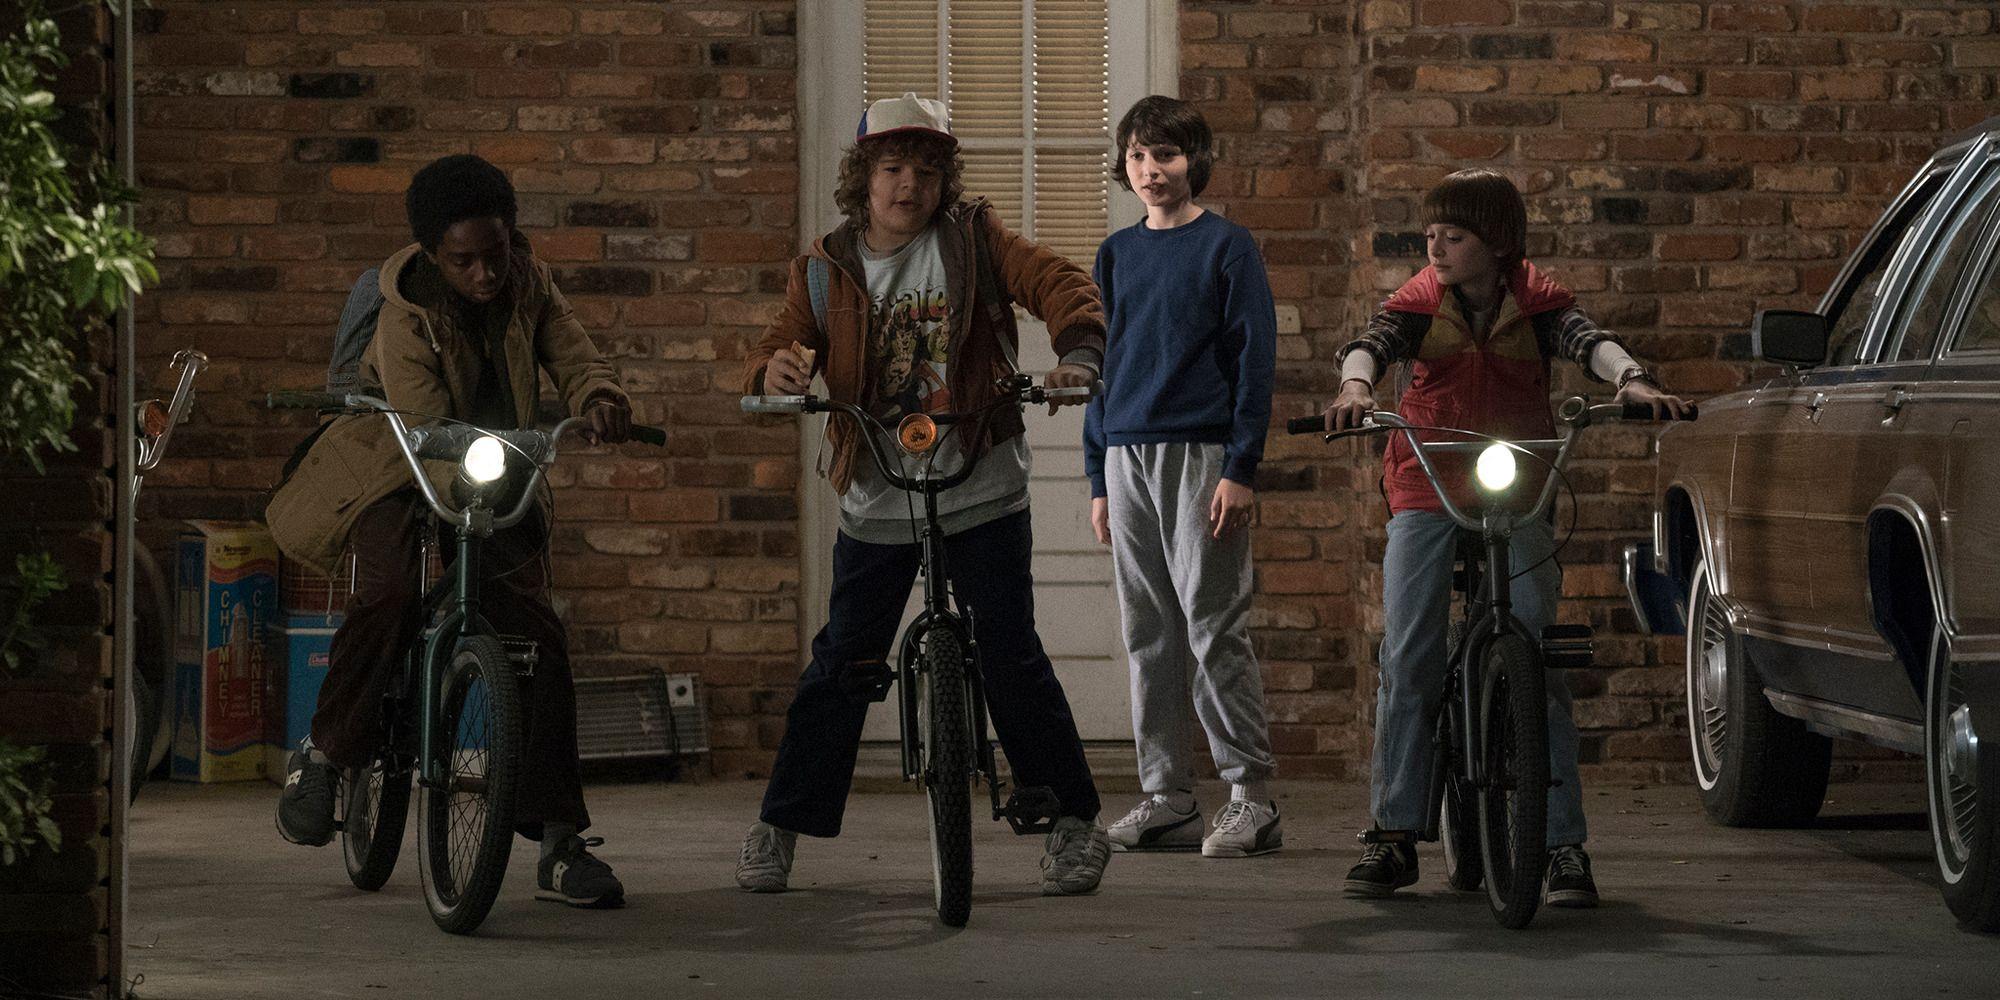 The children of 'Stranger Things' on their bikes, getting out of the garage